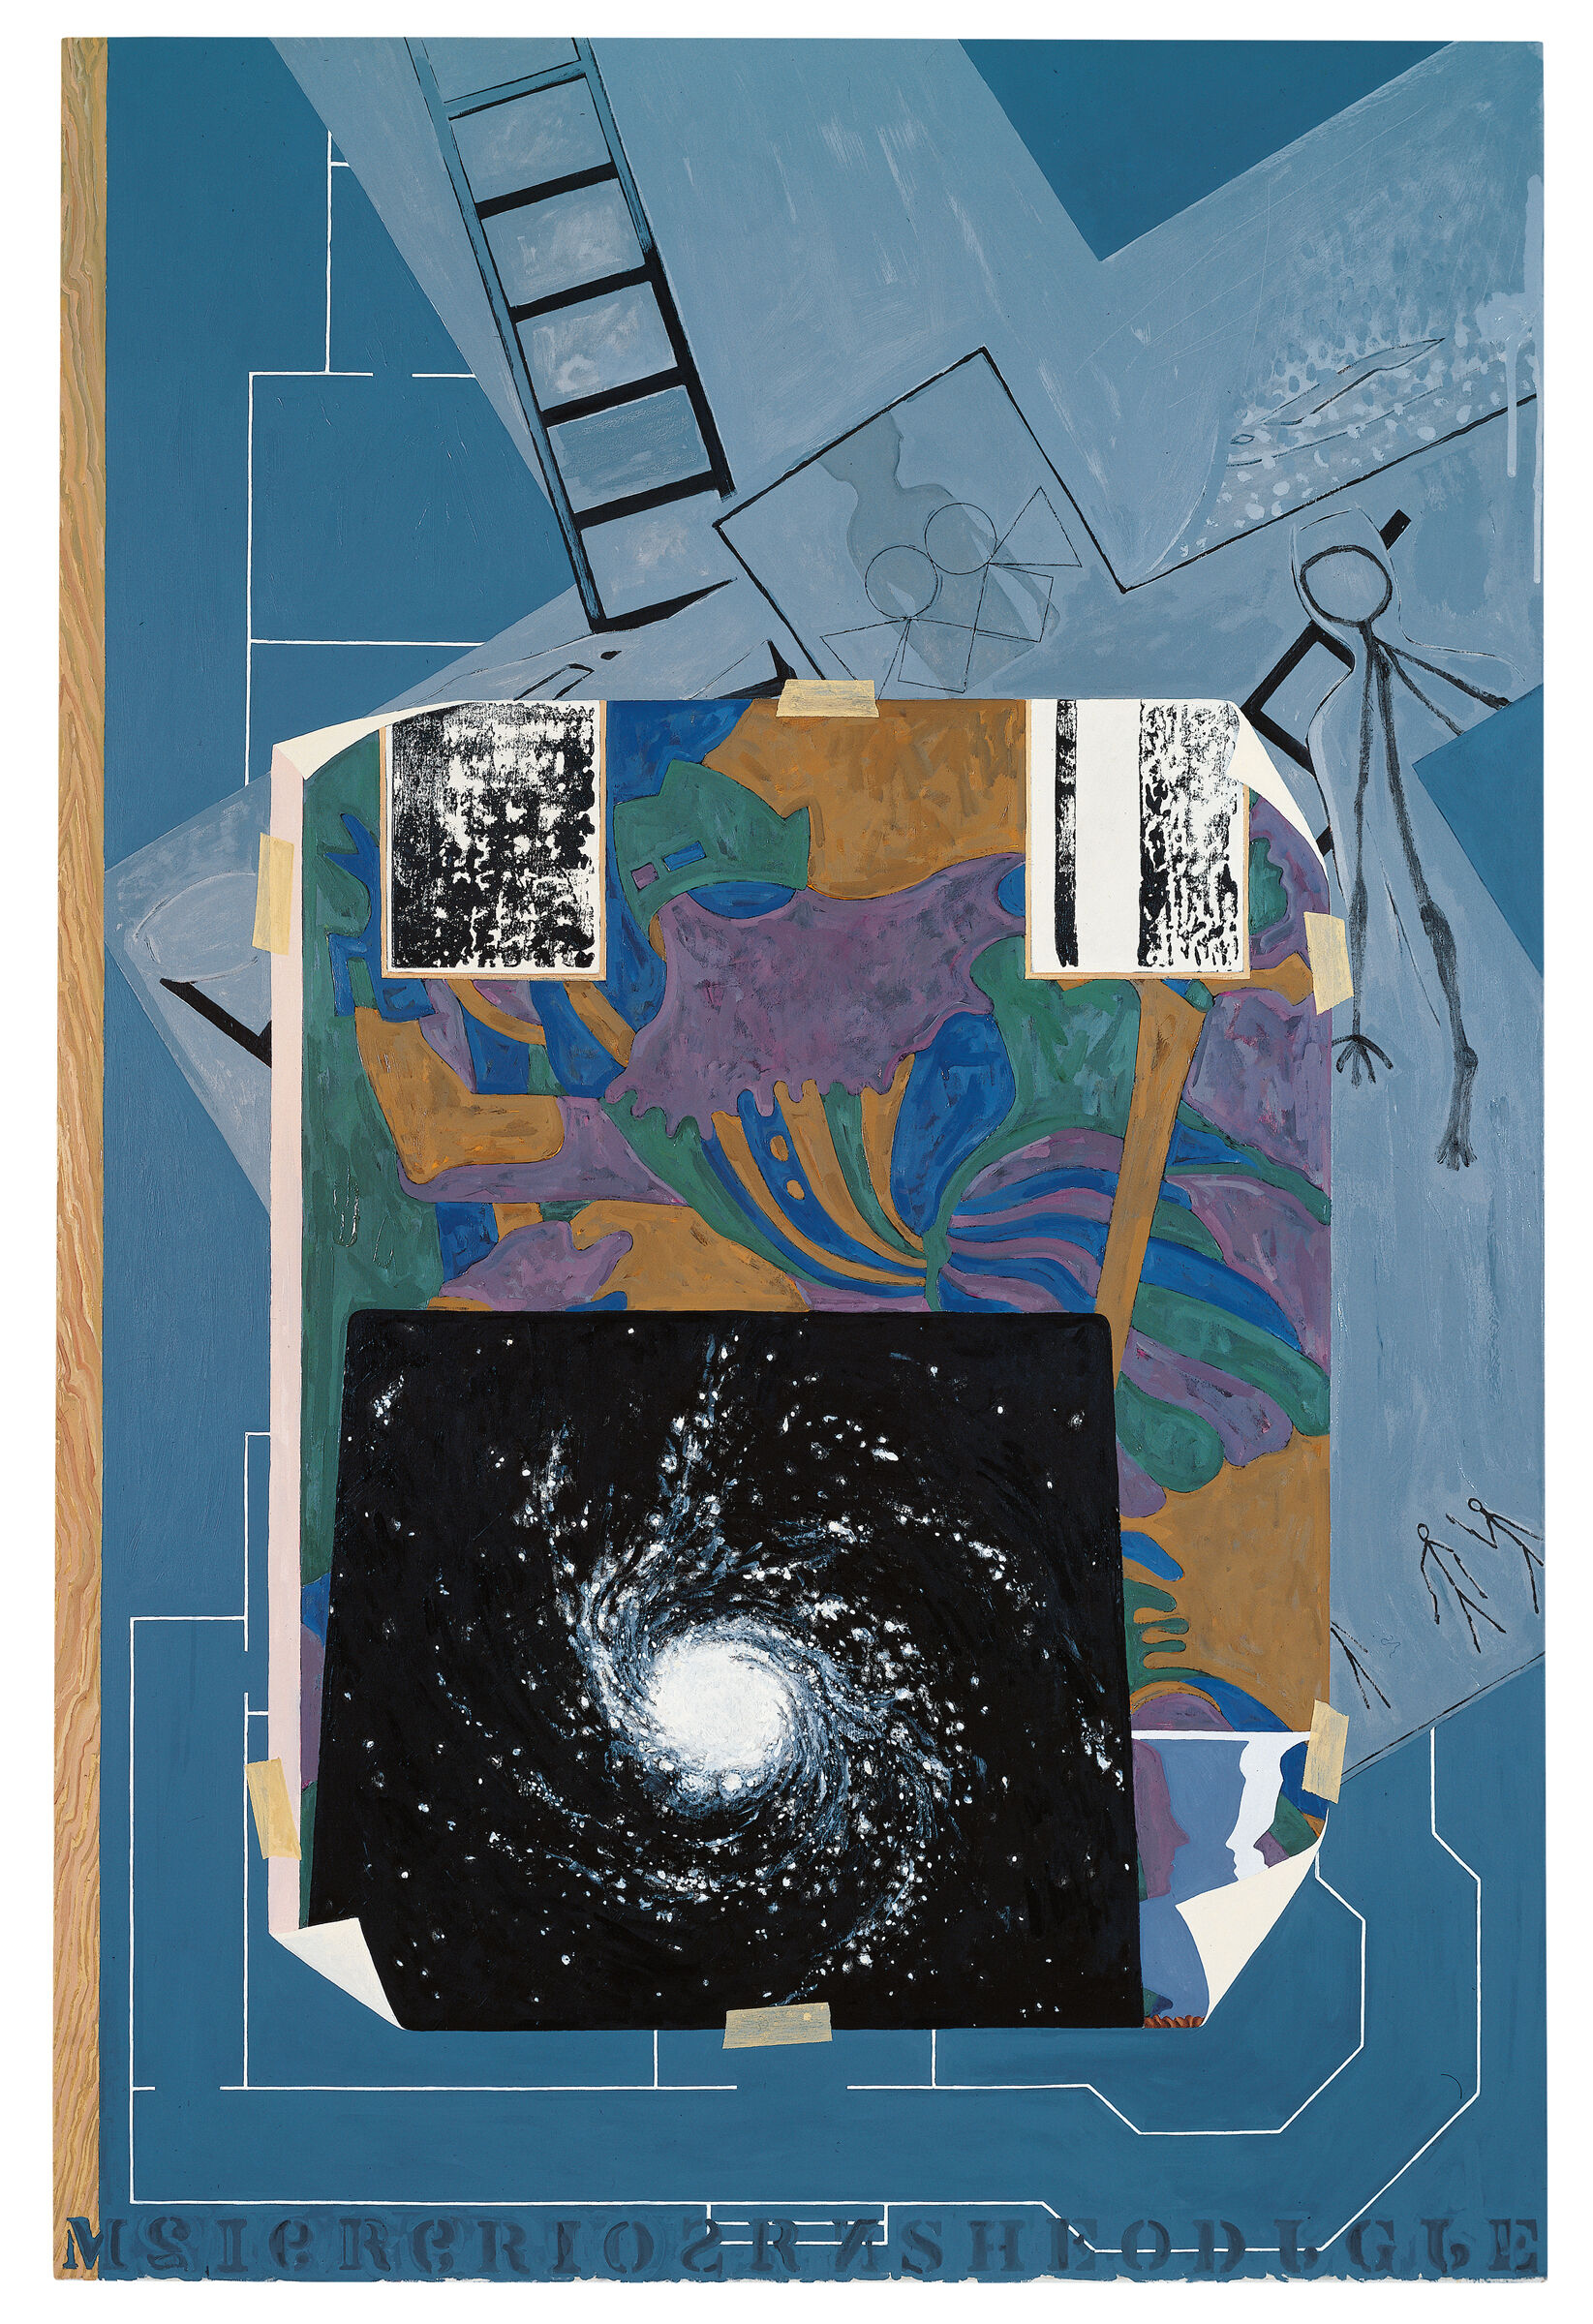 Tall rectangular painted collage, including a blueprint, photograph of a solar system, a taped-on abstract painting, and sketched stick figures.